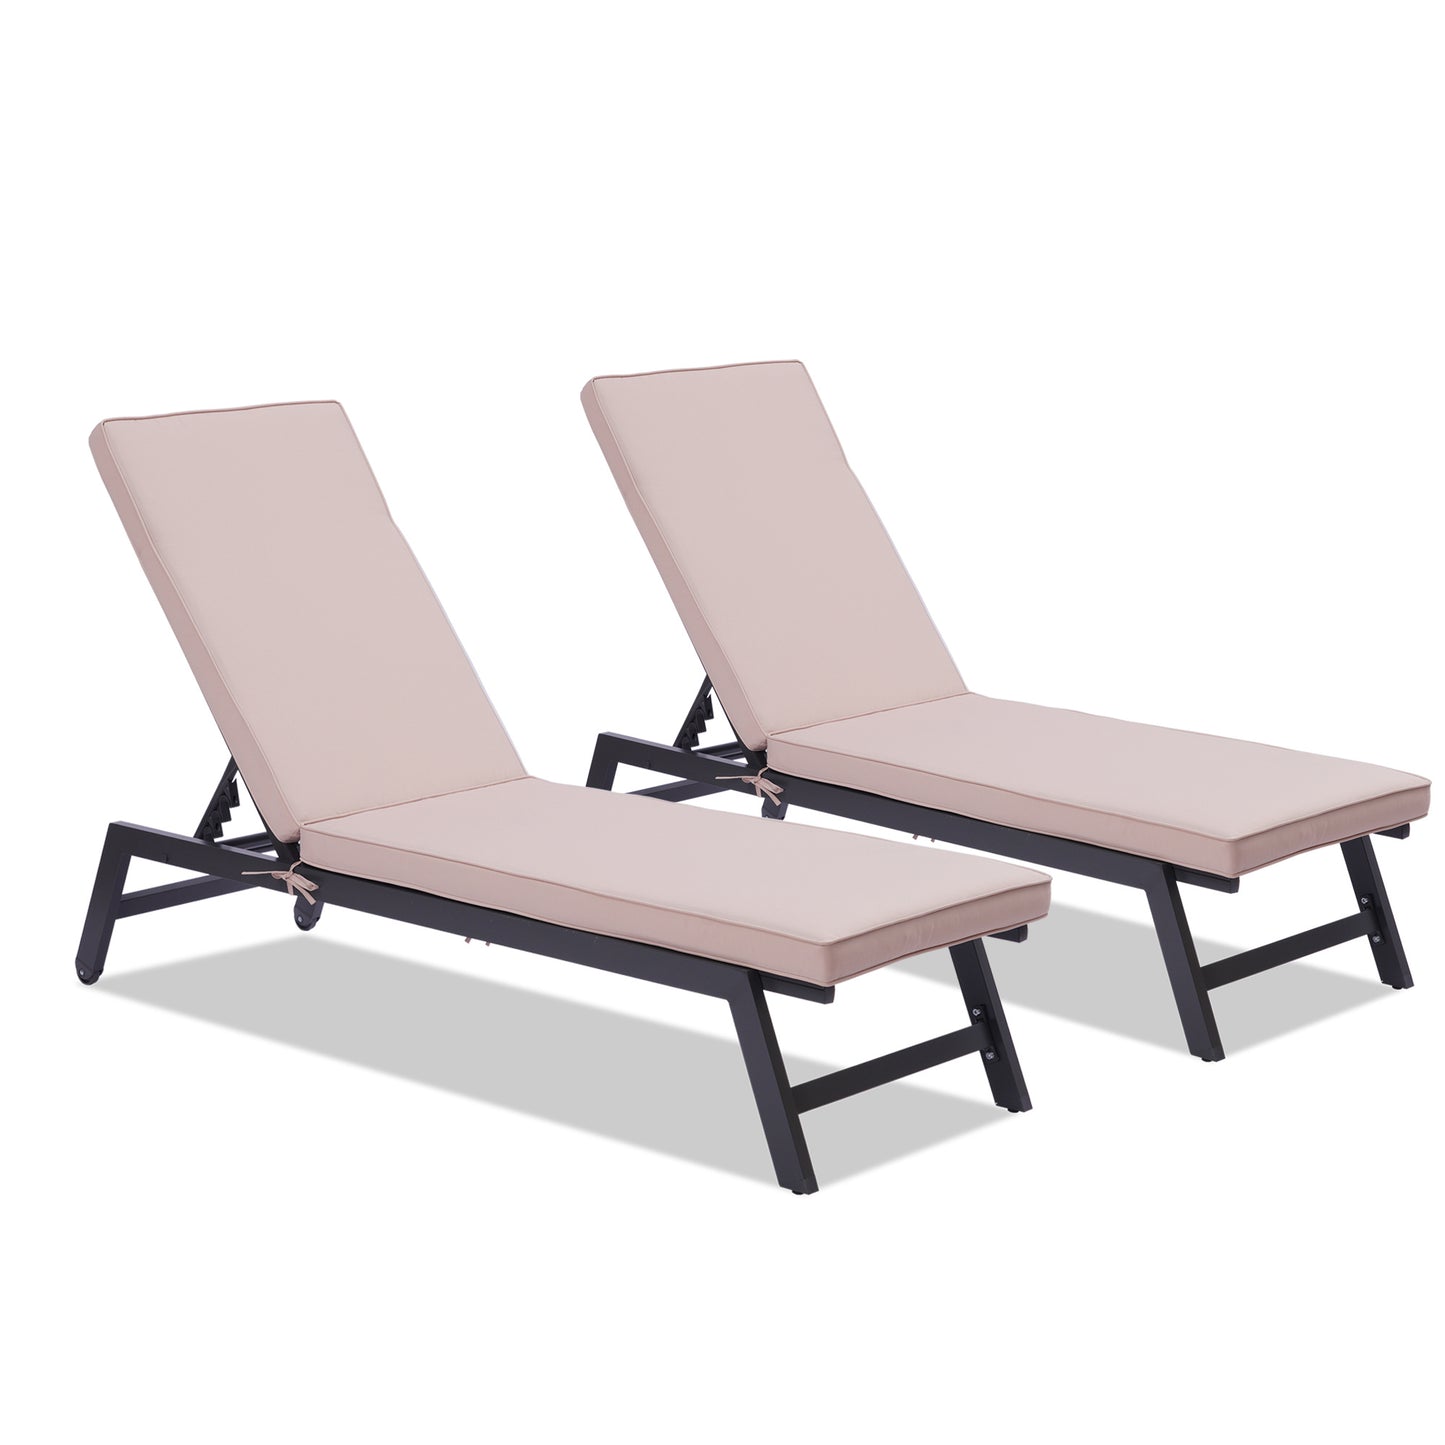 Outdoor Lounge Chair Replacement Cushions (2PCS Set)